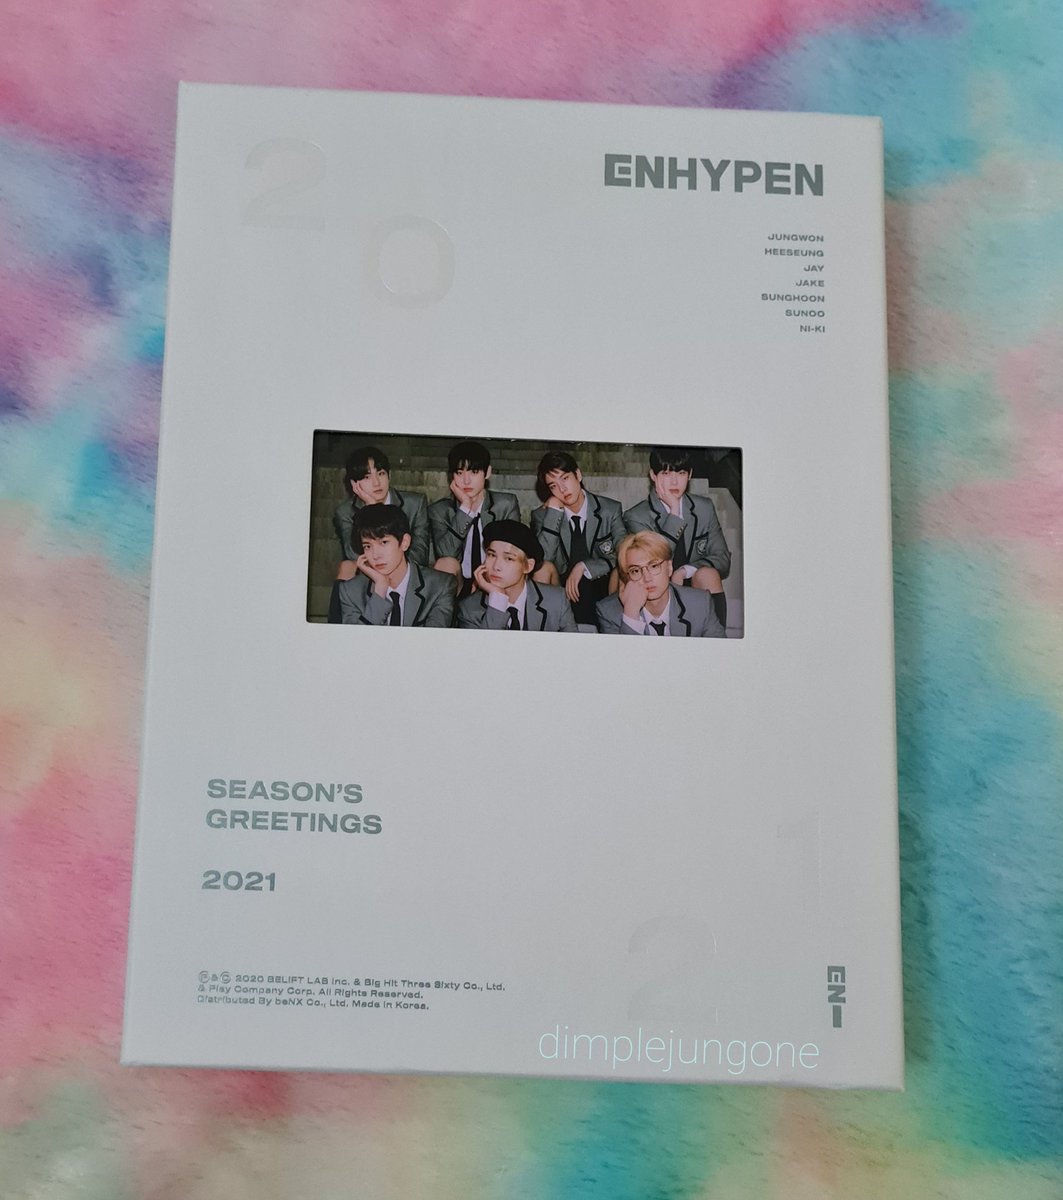 sg inclusions ☆(unsealed)- ot7 photocards- dvd - jungwon photostand - desk calendar- diary- sticker set